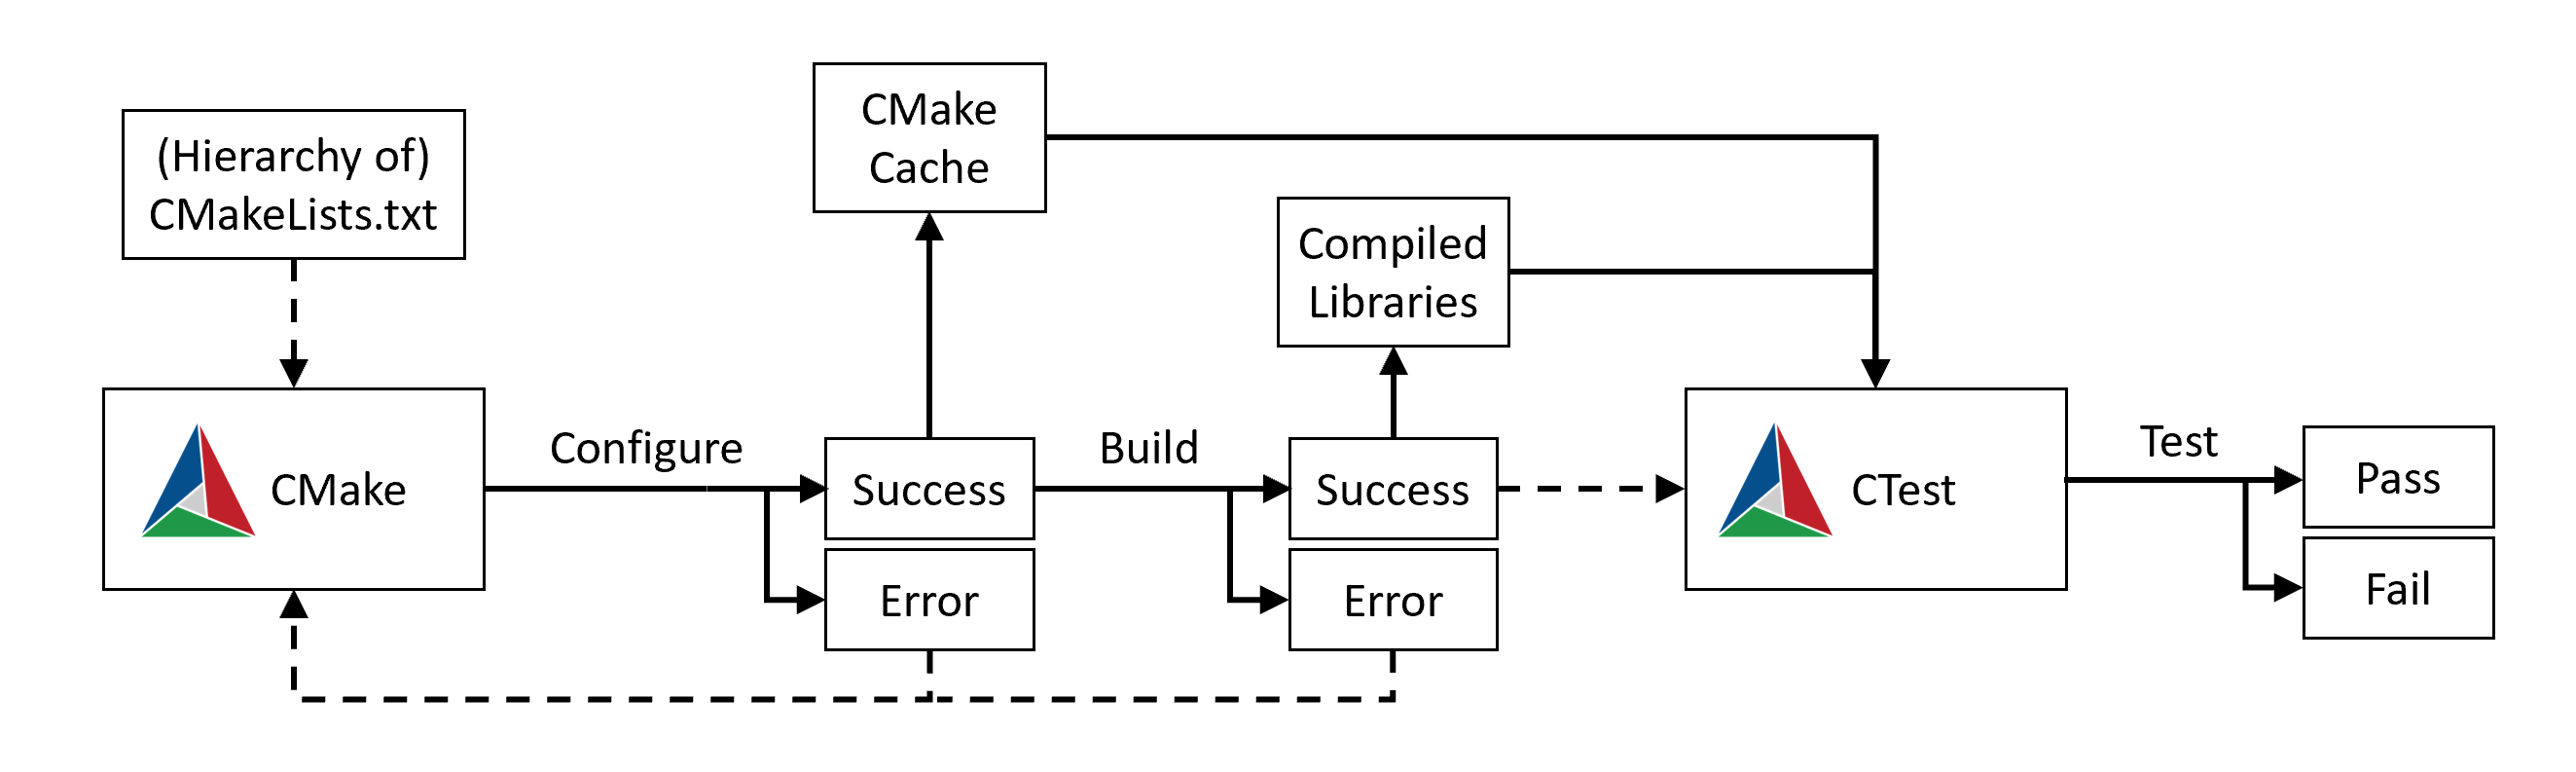 CMake and CTest workflow